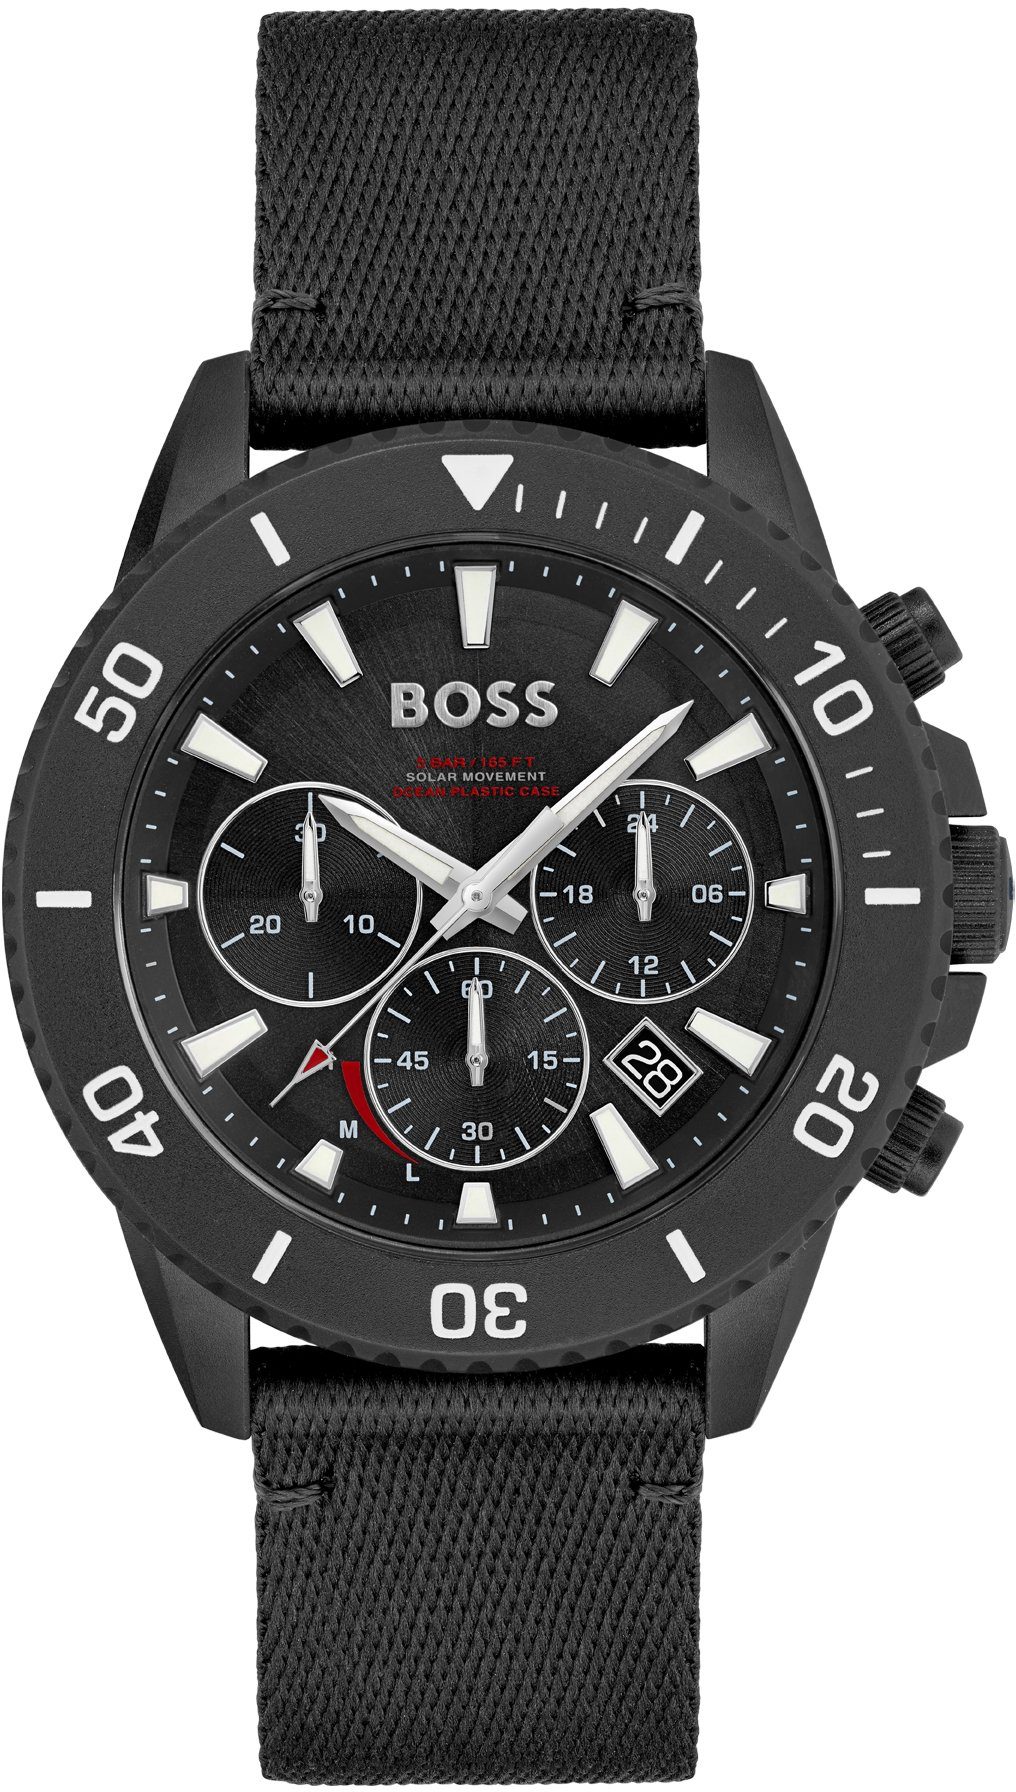 BOSS #tide, Chronograph Admiral Sustainable 1513918